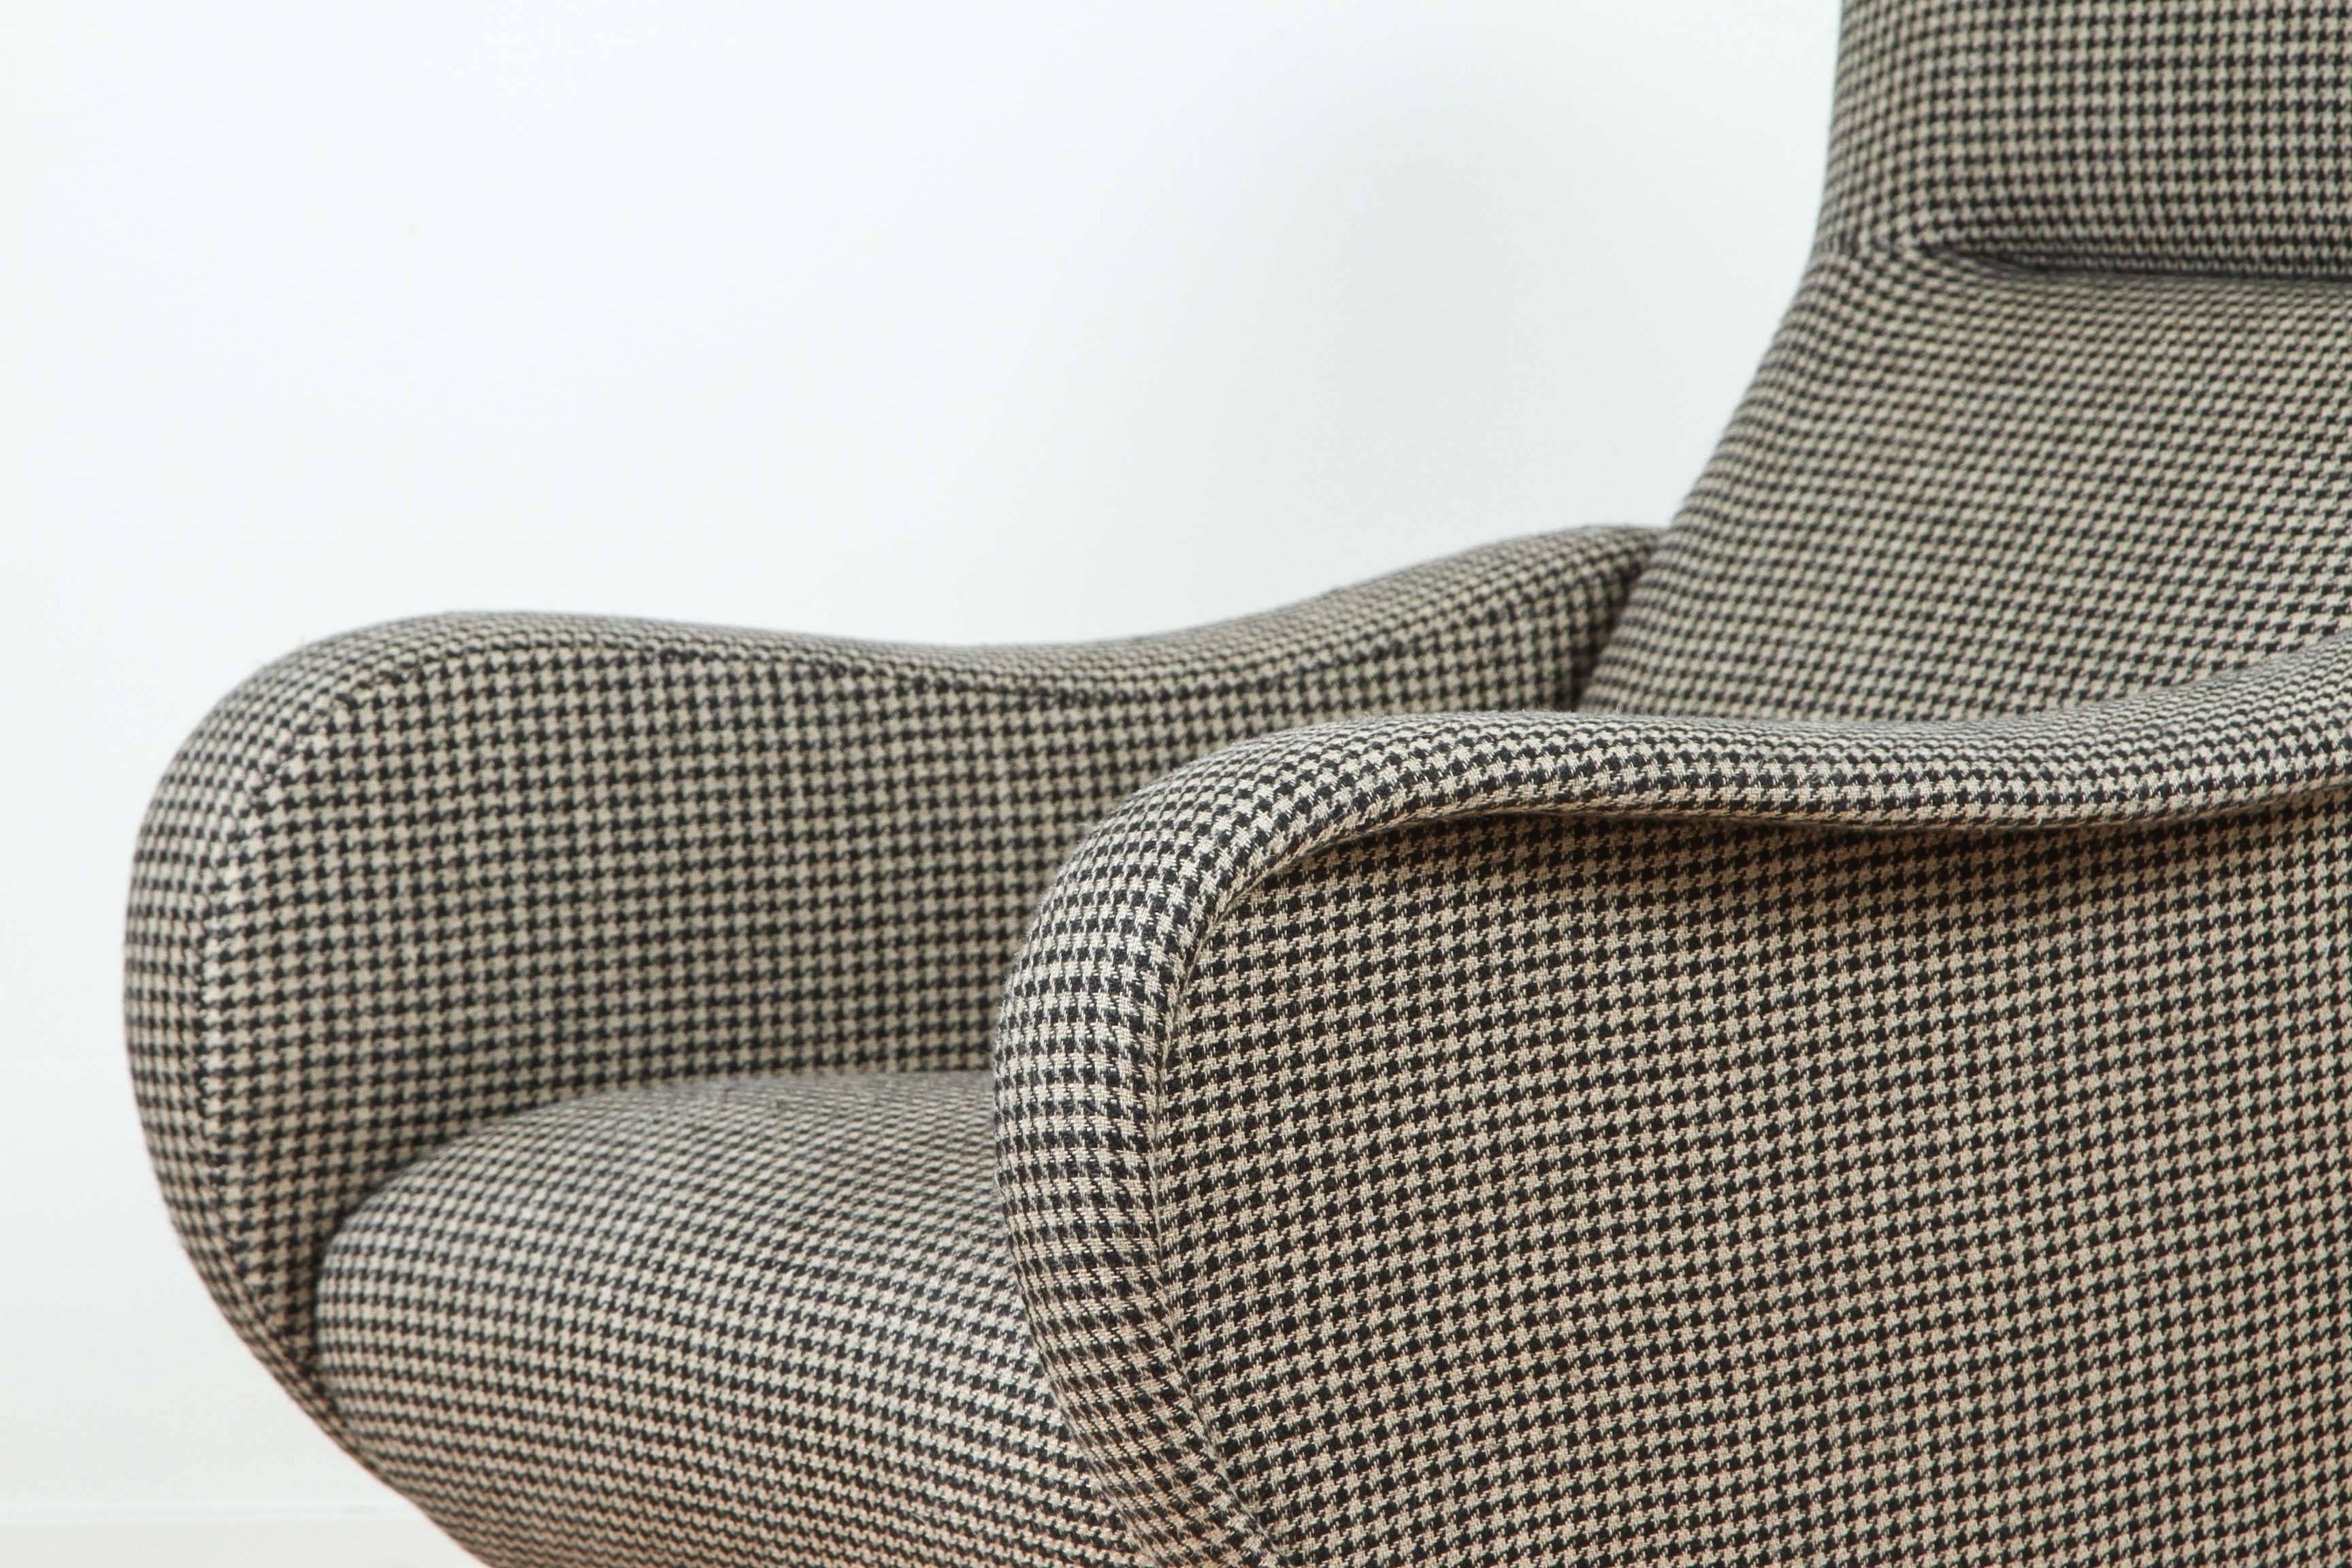 Pair of Italian Lounge Chairs Upholstered in Wool Houndstooth 1